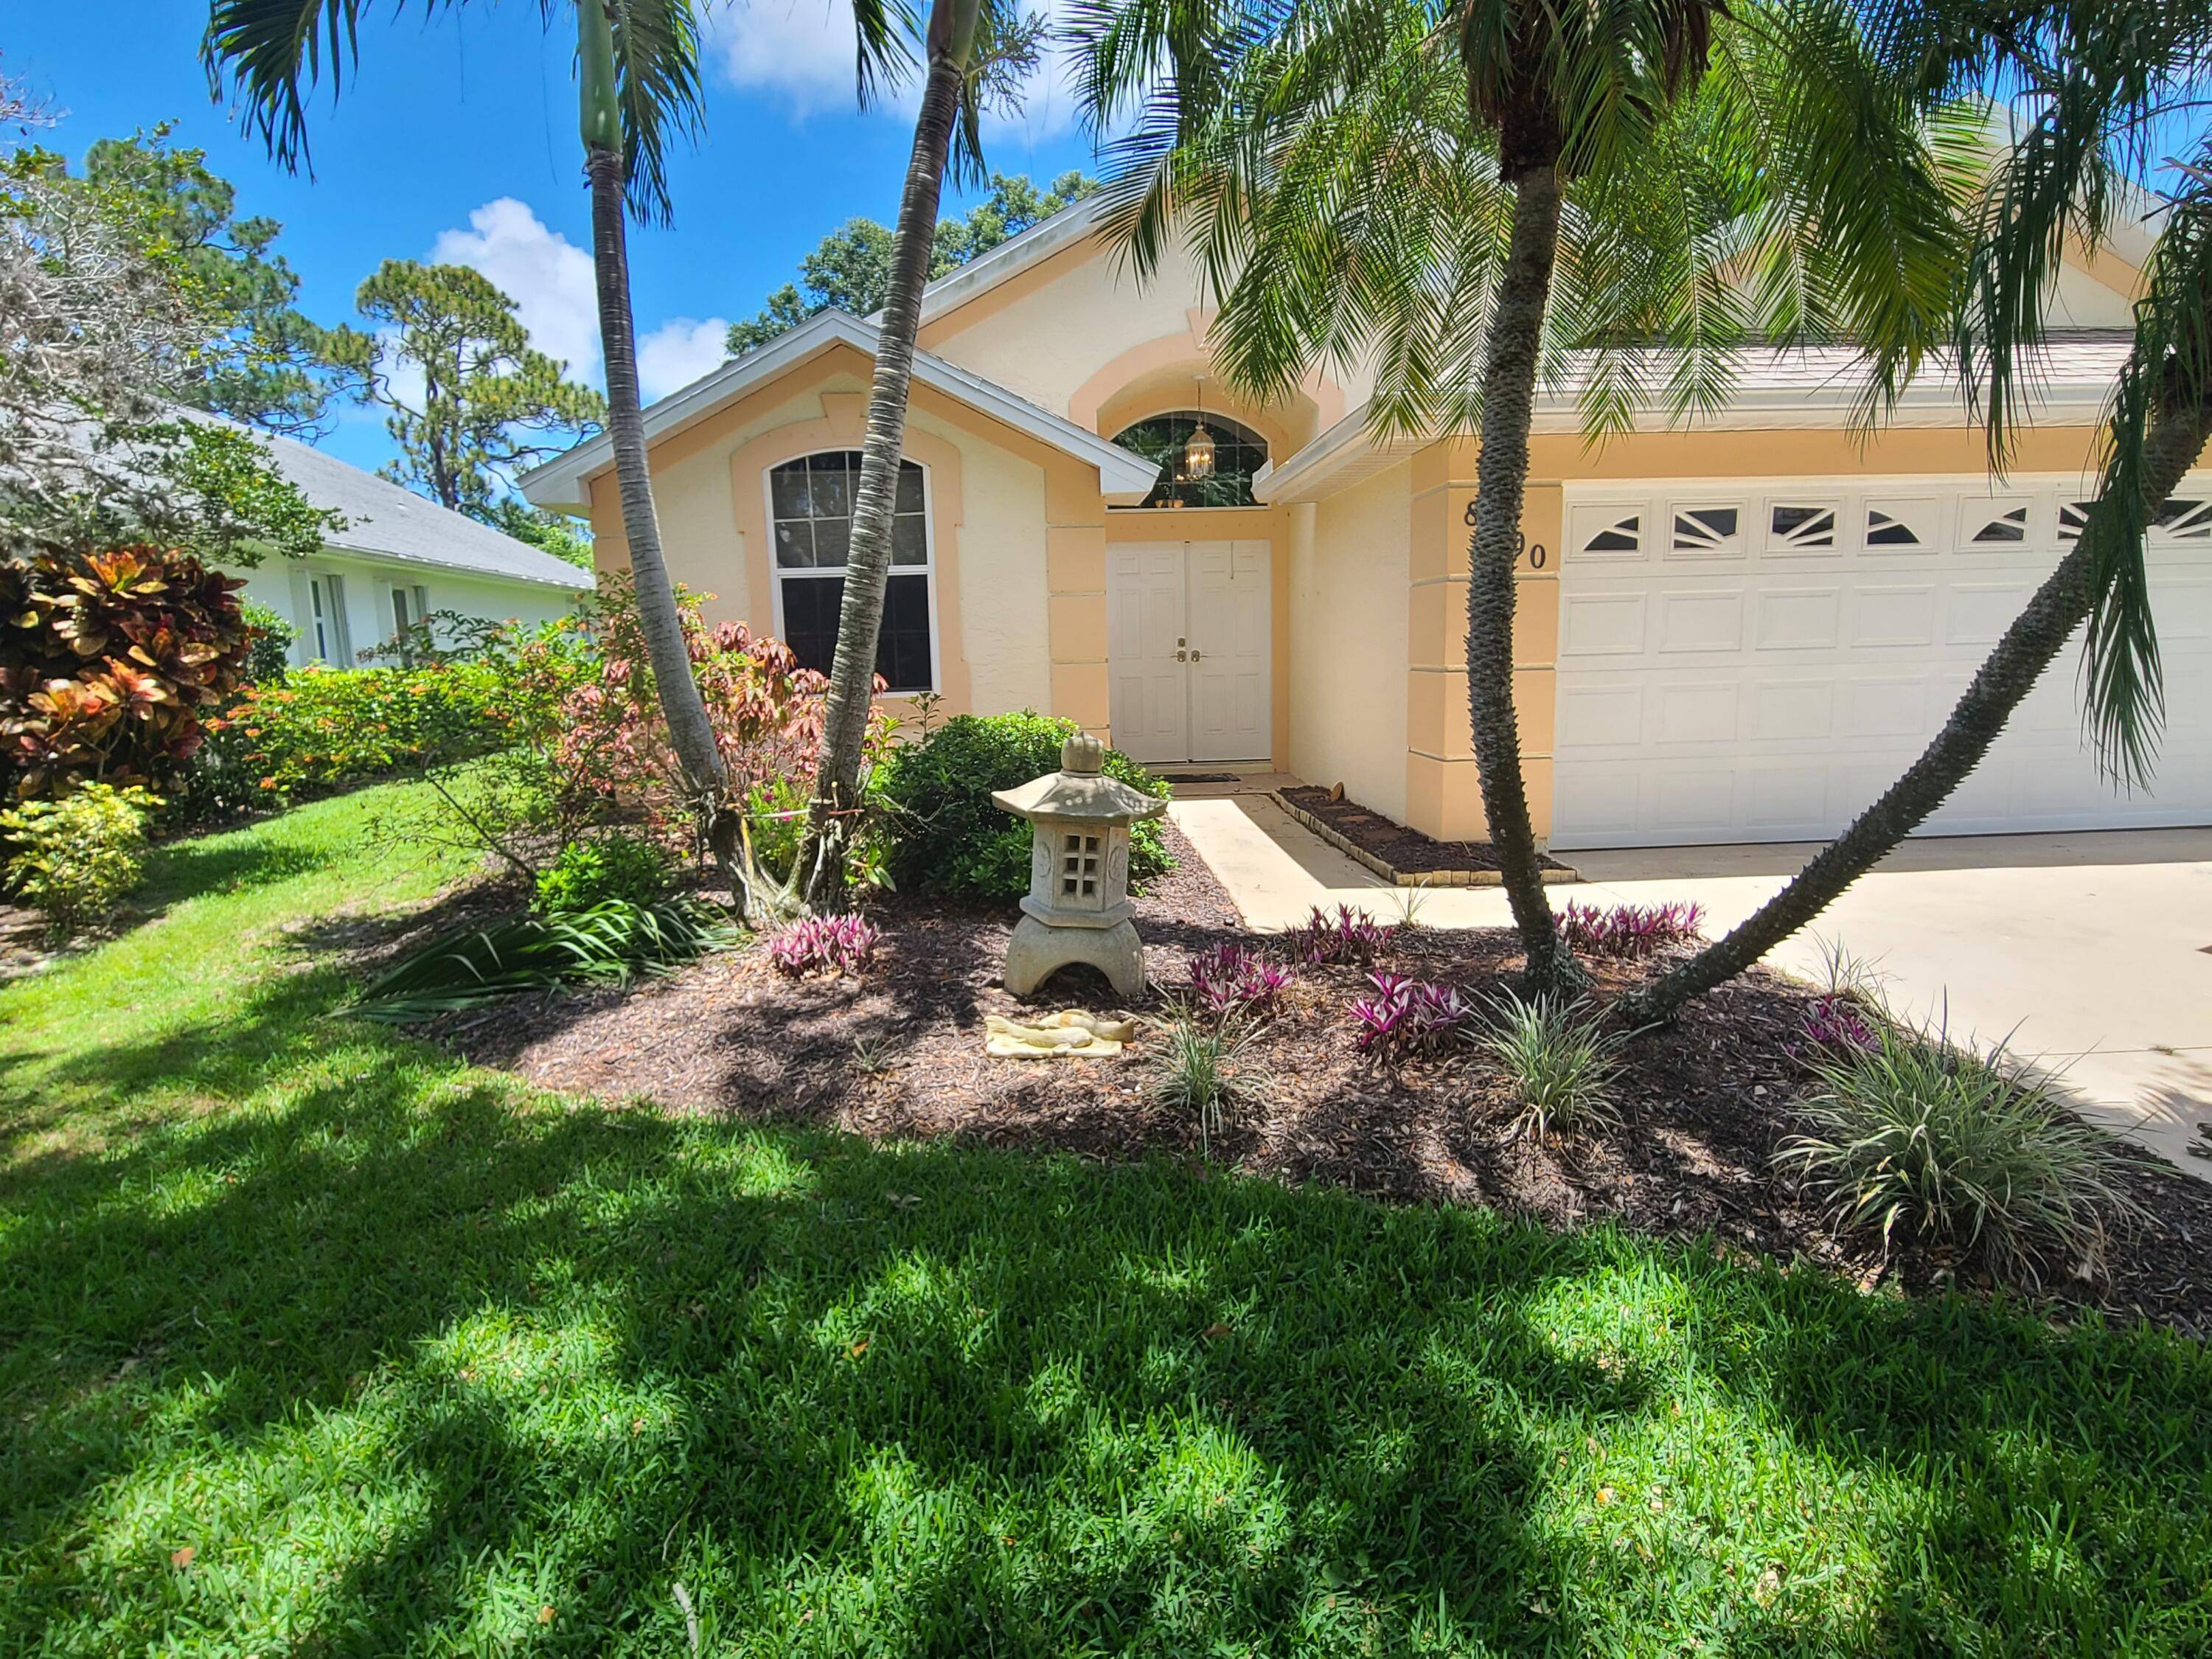 3 2 2 CBS Home nestled in Lake Lucie with tree lined streets.